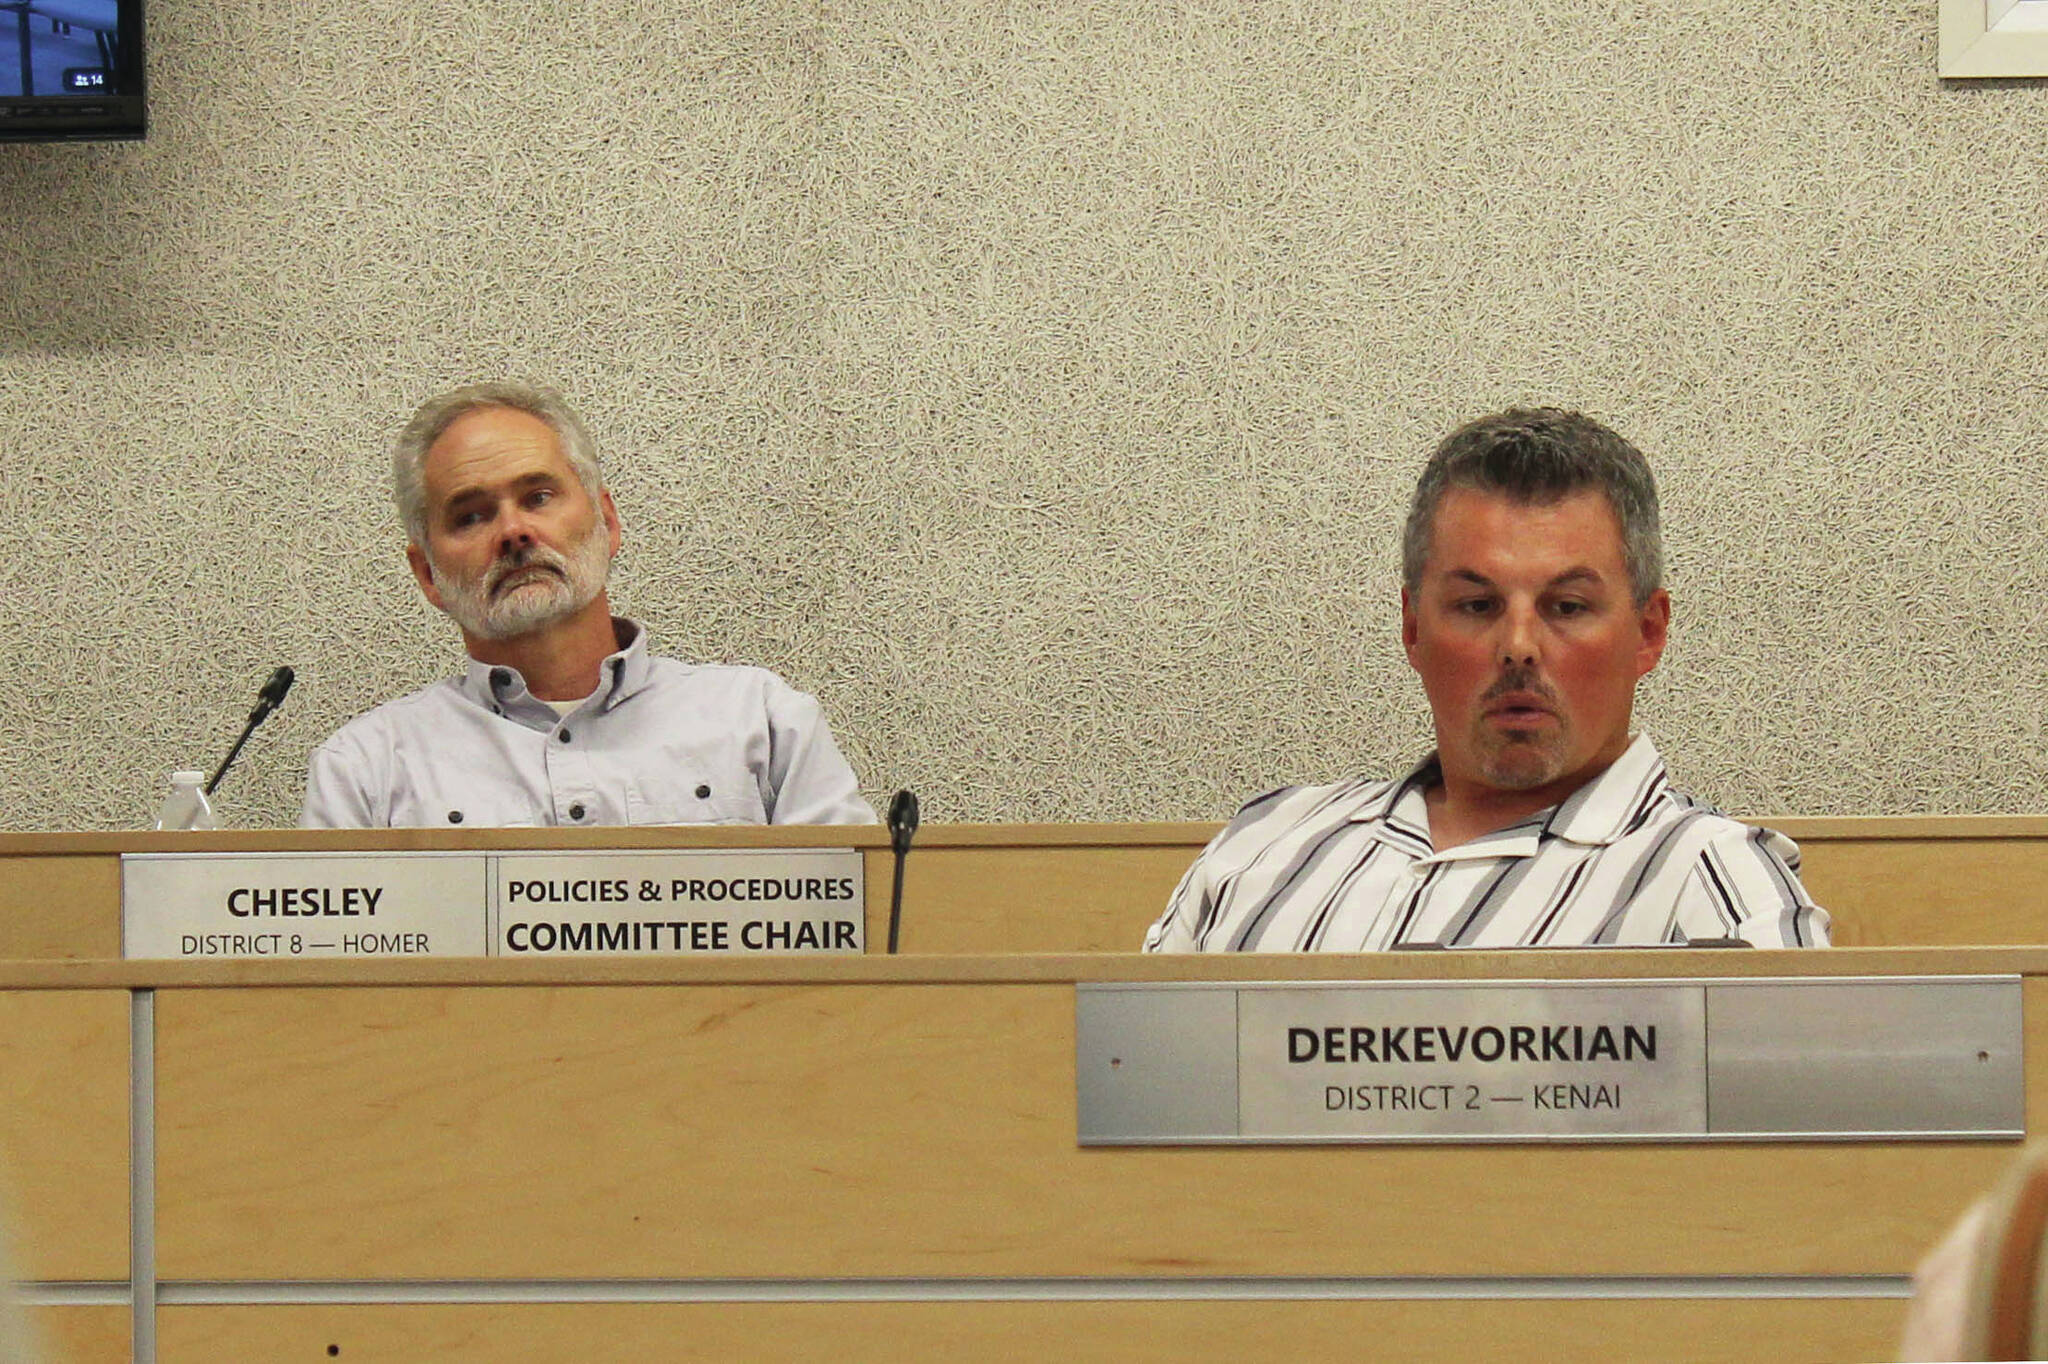 Assembly members Lane Chesley (left) and Richard Derkevorkian (right) participate in a borough assembly meeting on Tuesday in Soldotna . (Ashlyn O’Haara/Peninsula Clarion)